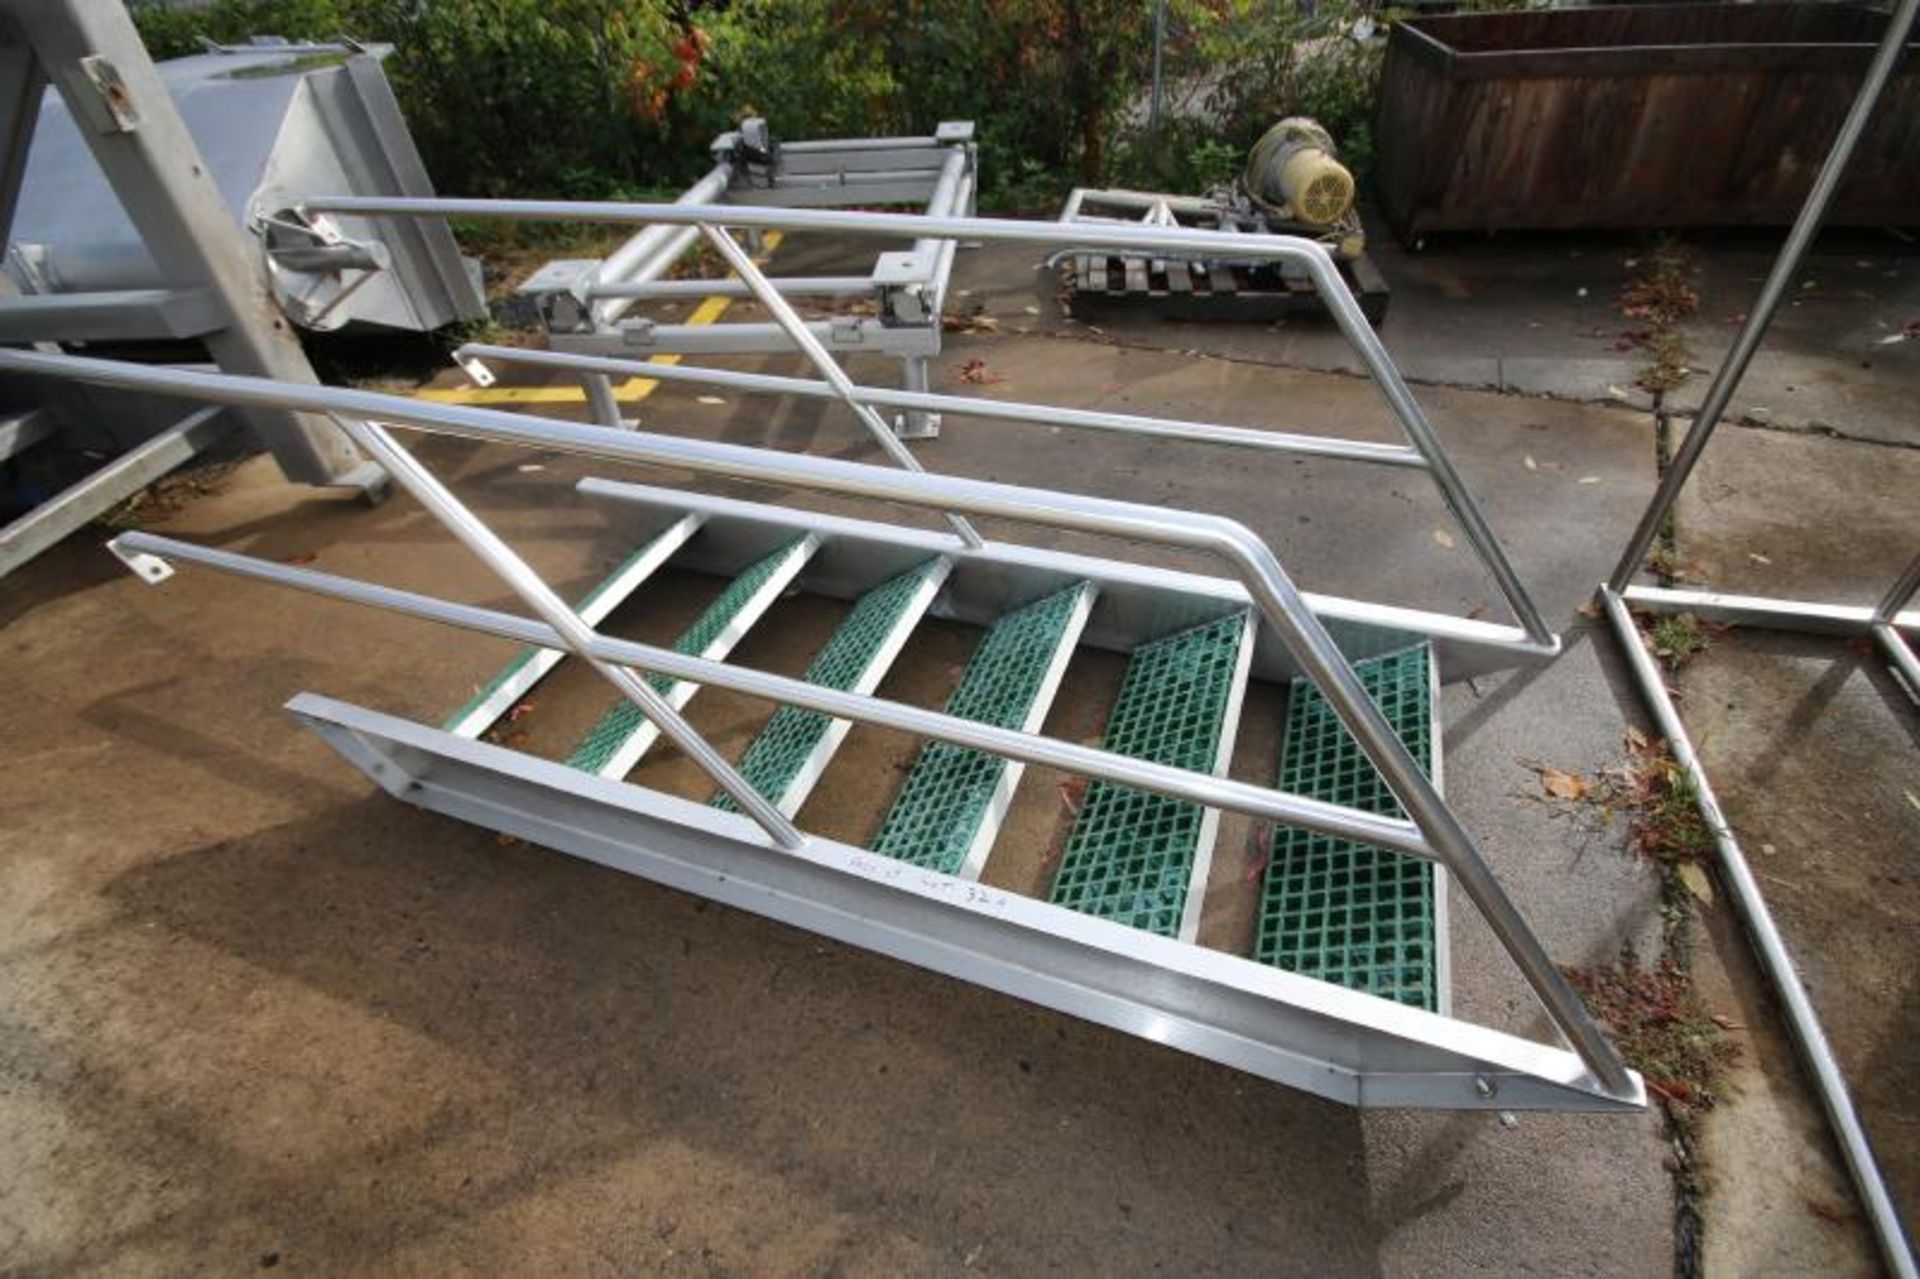 Aprox. 6 ft. L x 64" W x 54" H S/S Platform with Handrail, Stairs and Plastic Grating, - Image 3 of 3